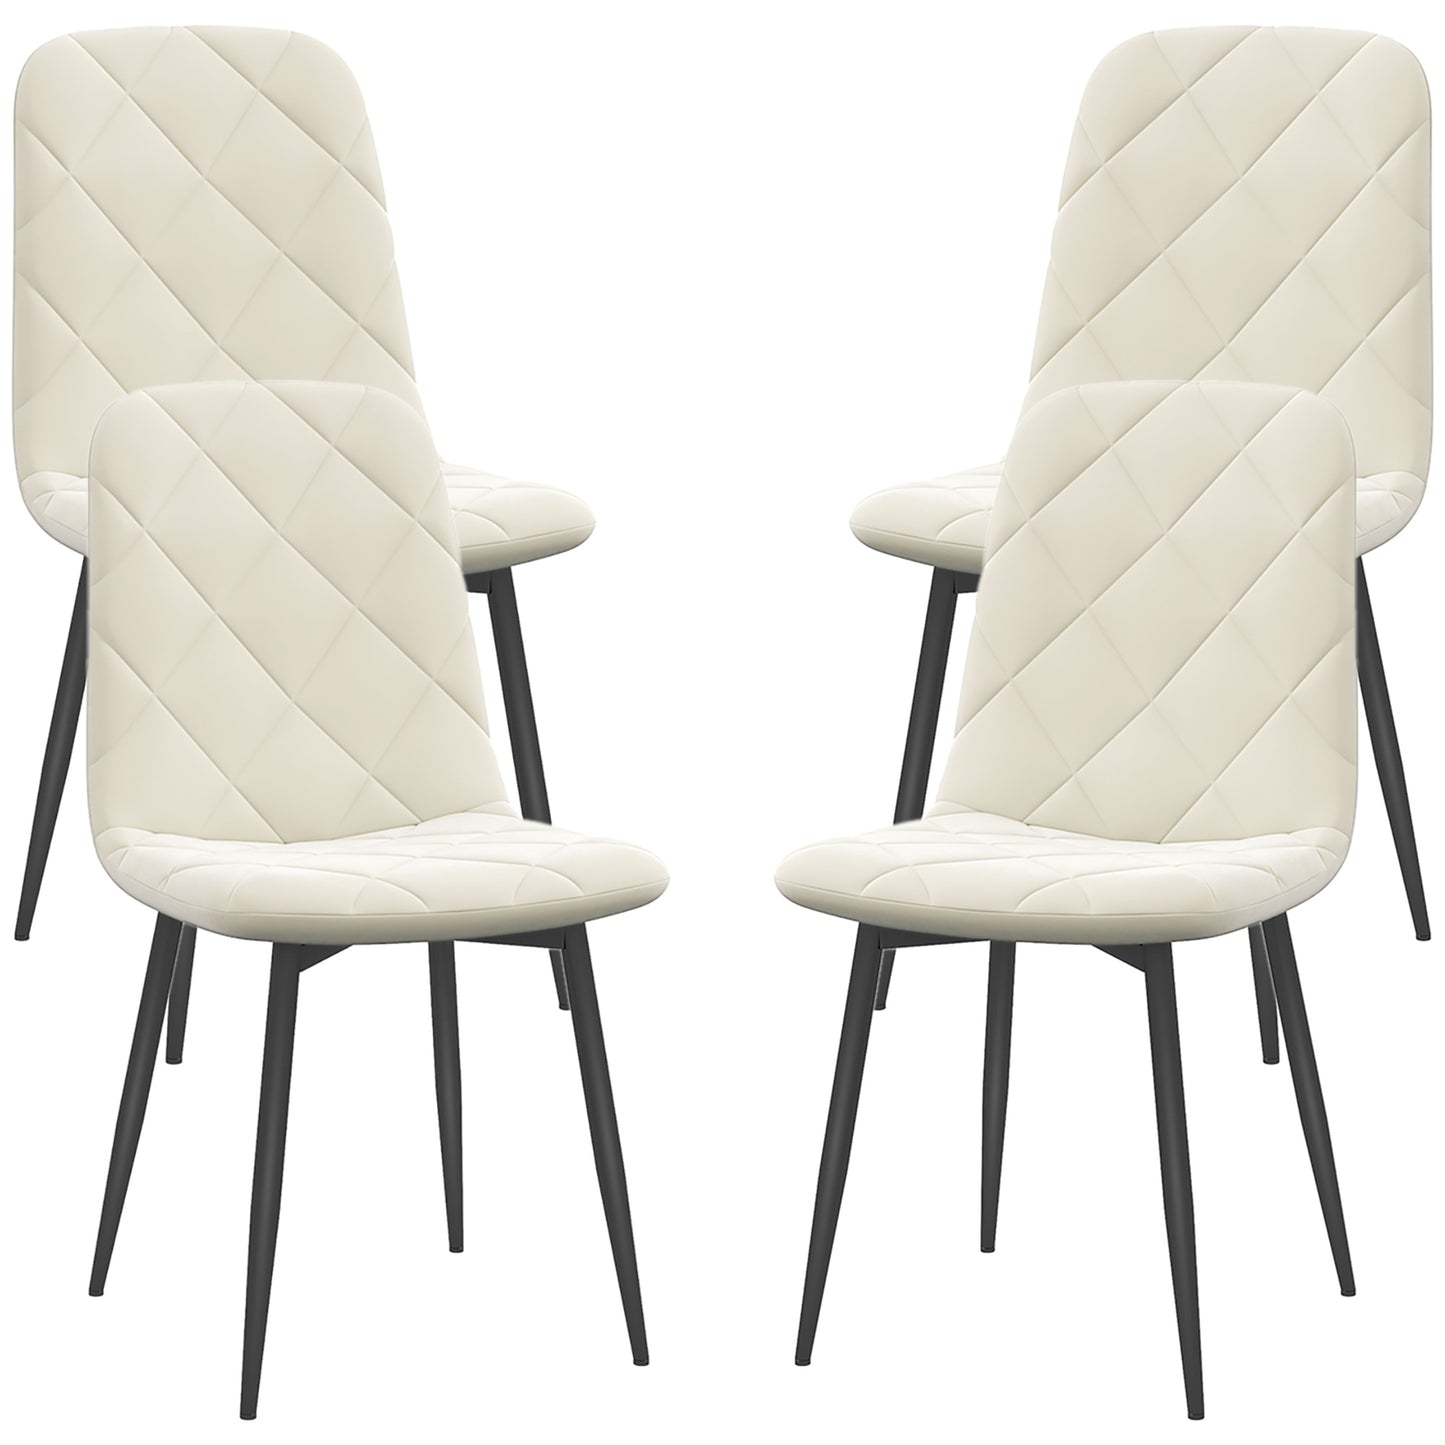 Dining Chairs Set of 4, Upholstered with Steel Legs, in Cream